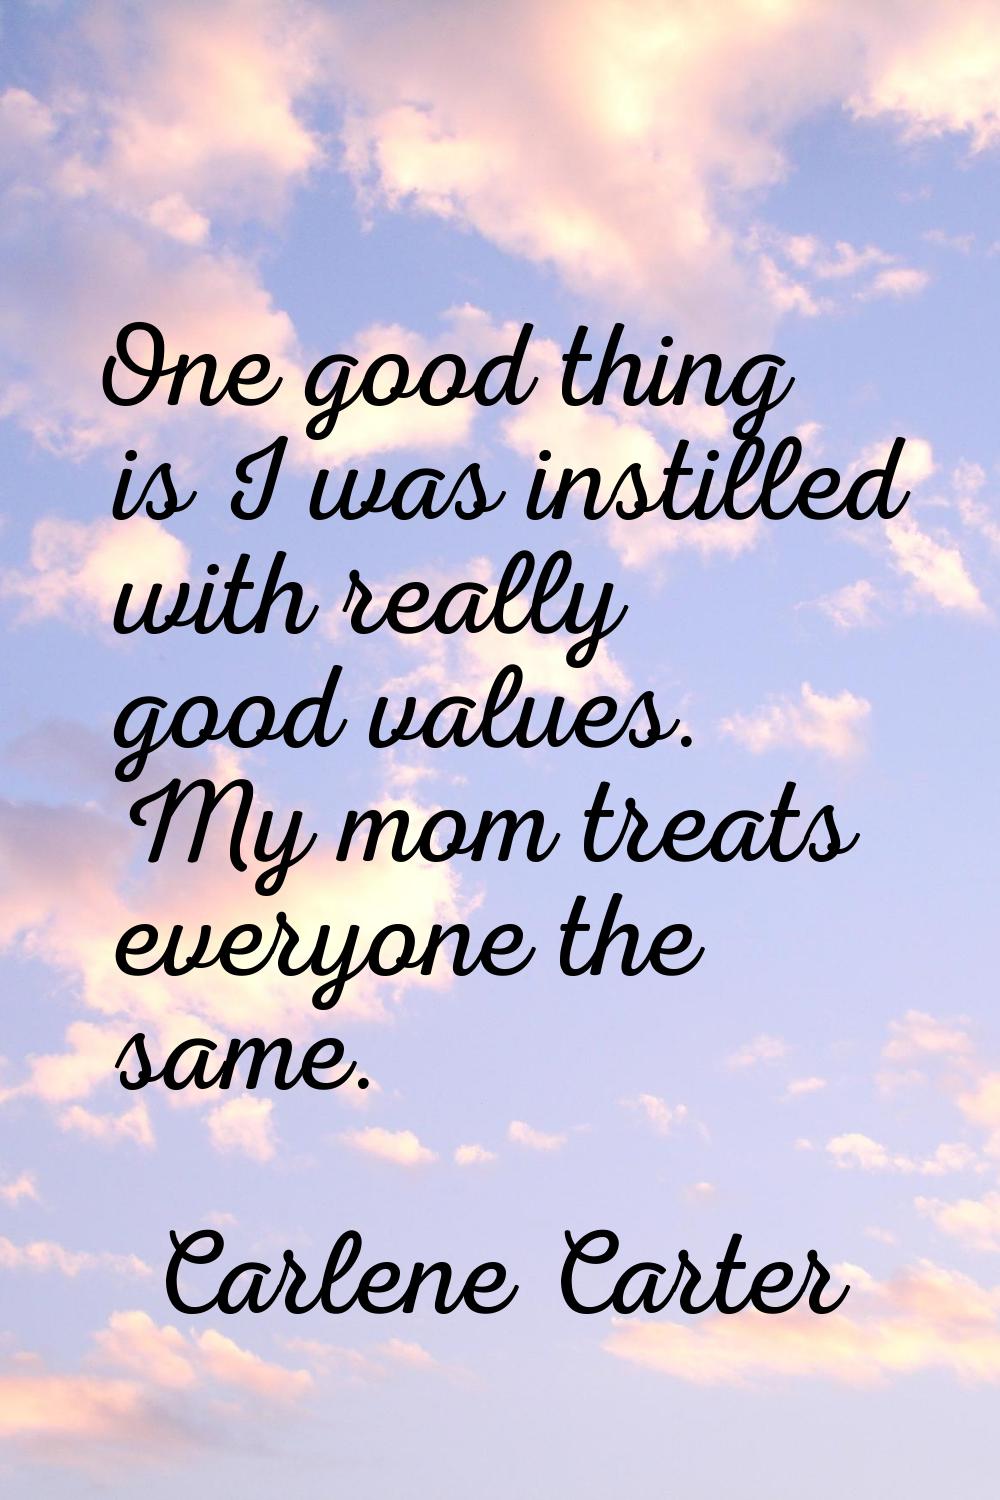 One good thing is I was instilled with really good values. My mom treats everyone the same.